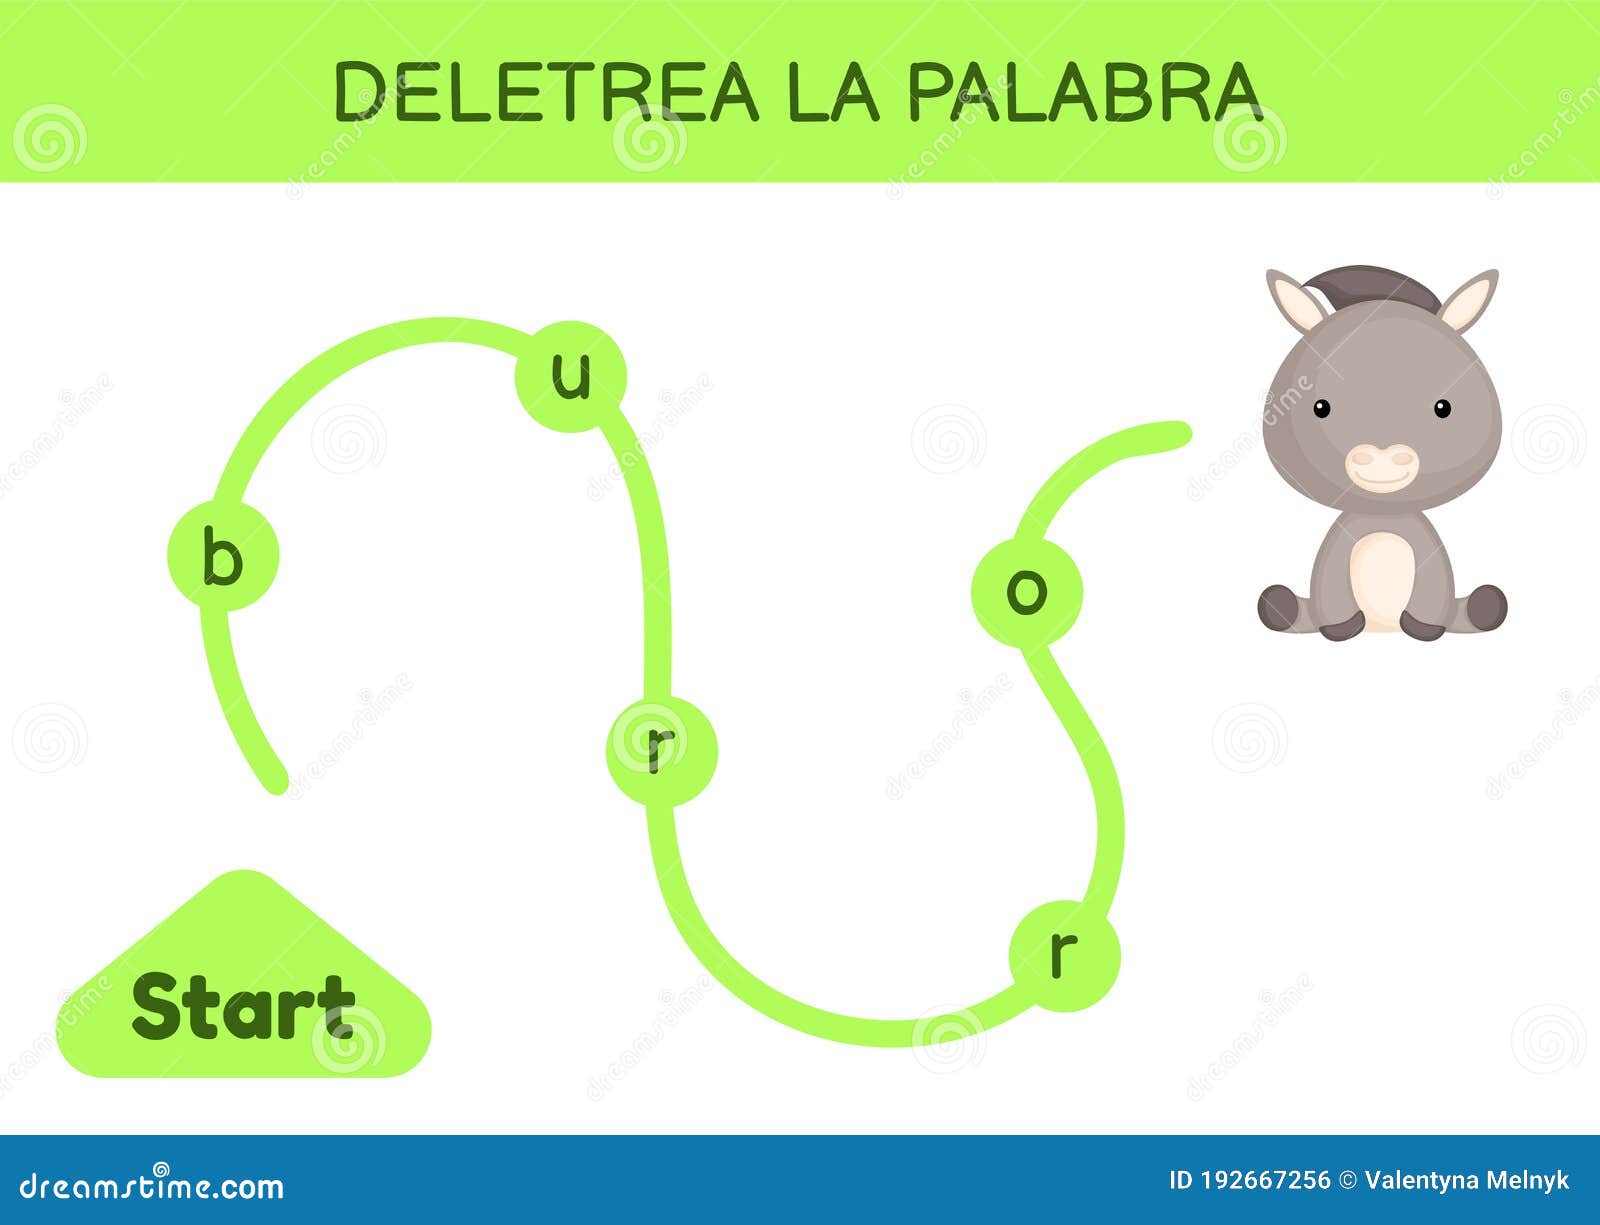 deletrea la palabra - spell the word. maze for kids. spelling word game template. learn to read word donkey. activity page for